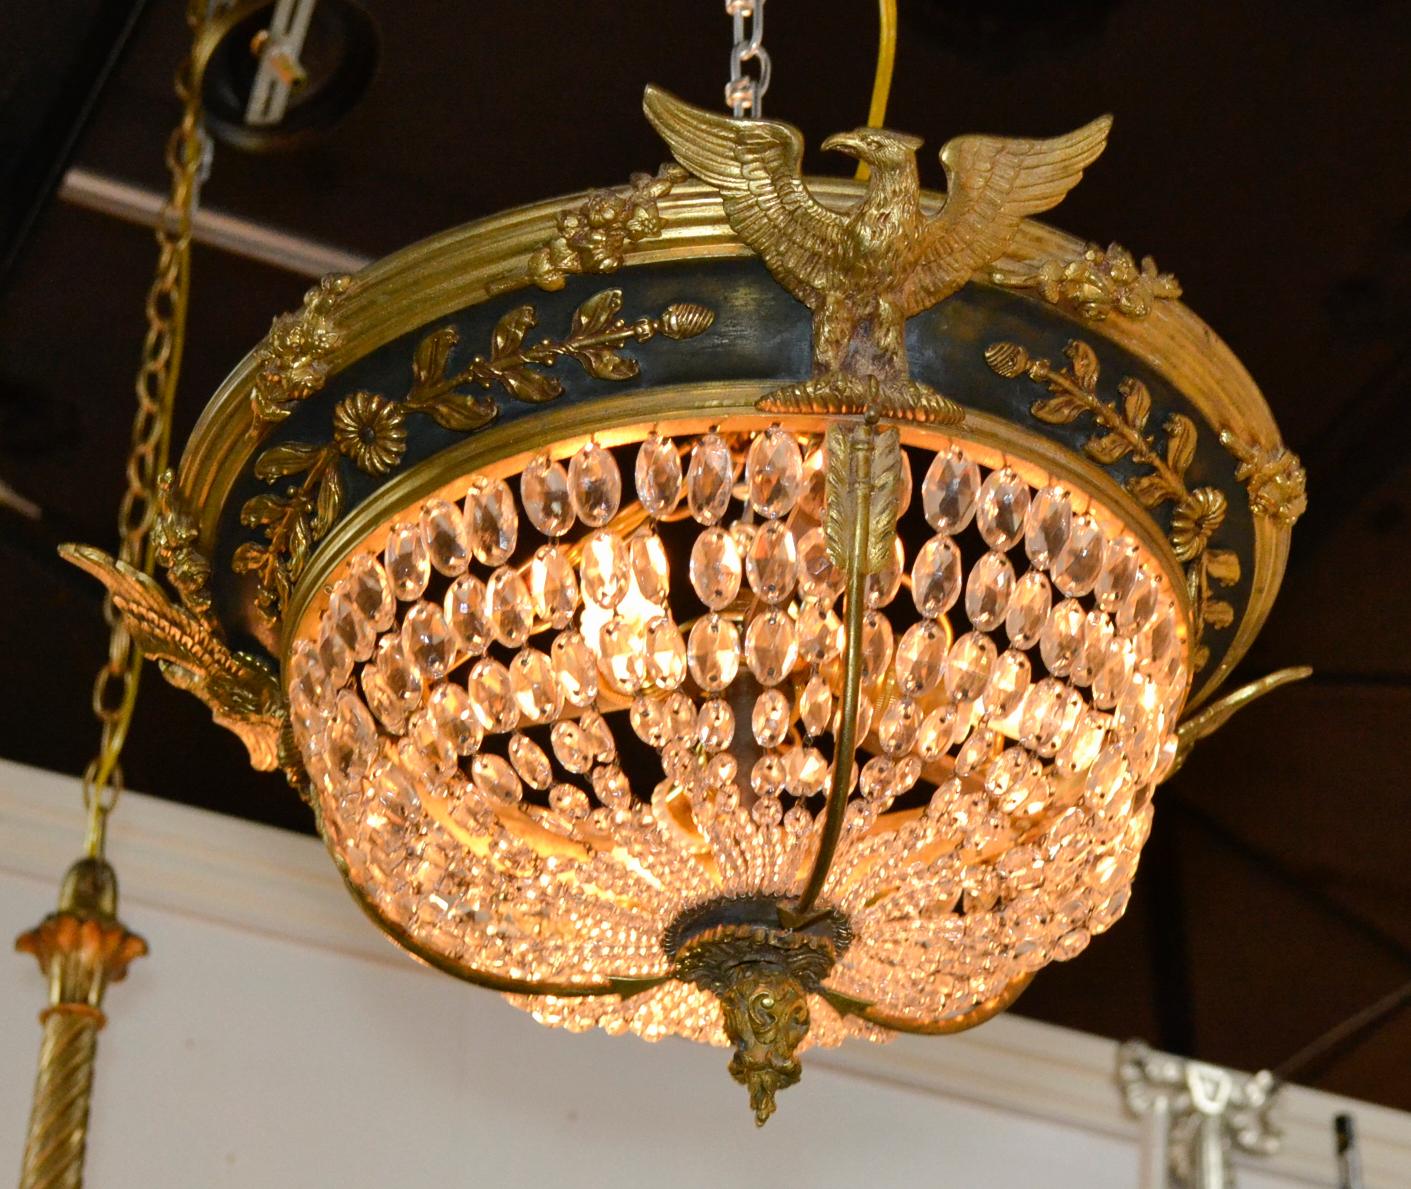 19th Century French Empire Ceiling Fixture (Bronze)